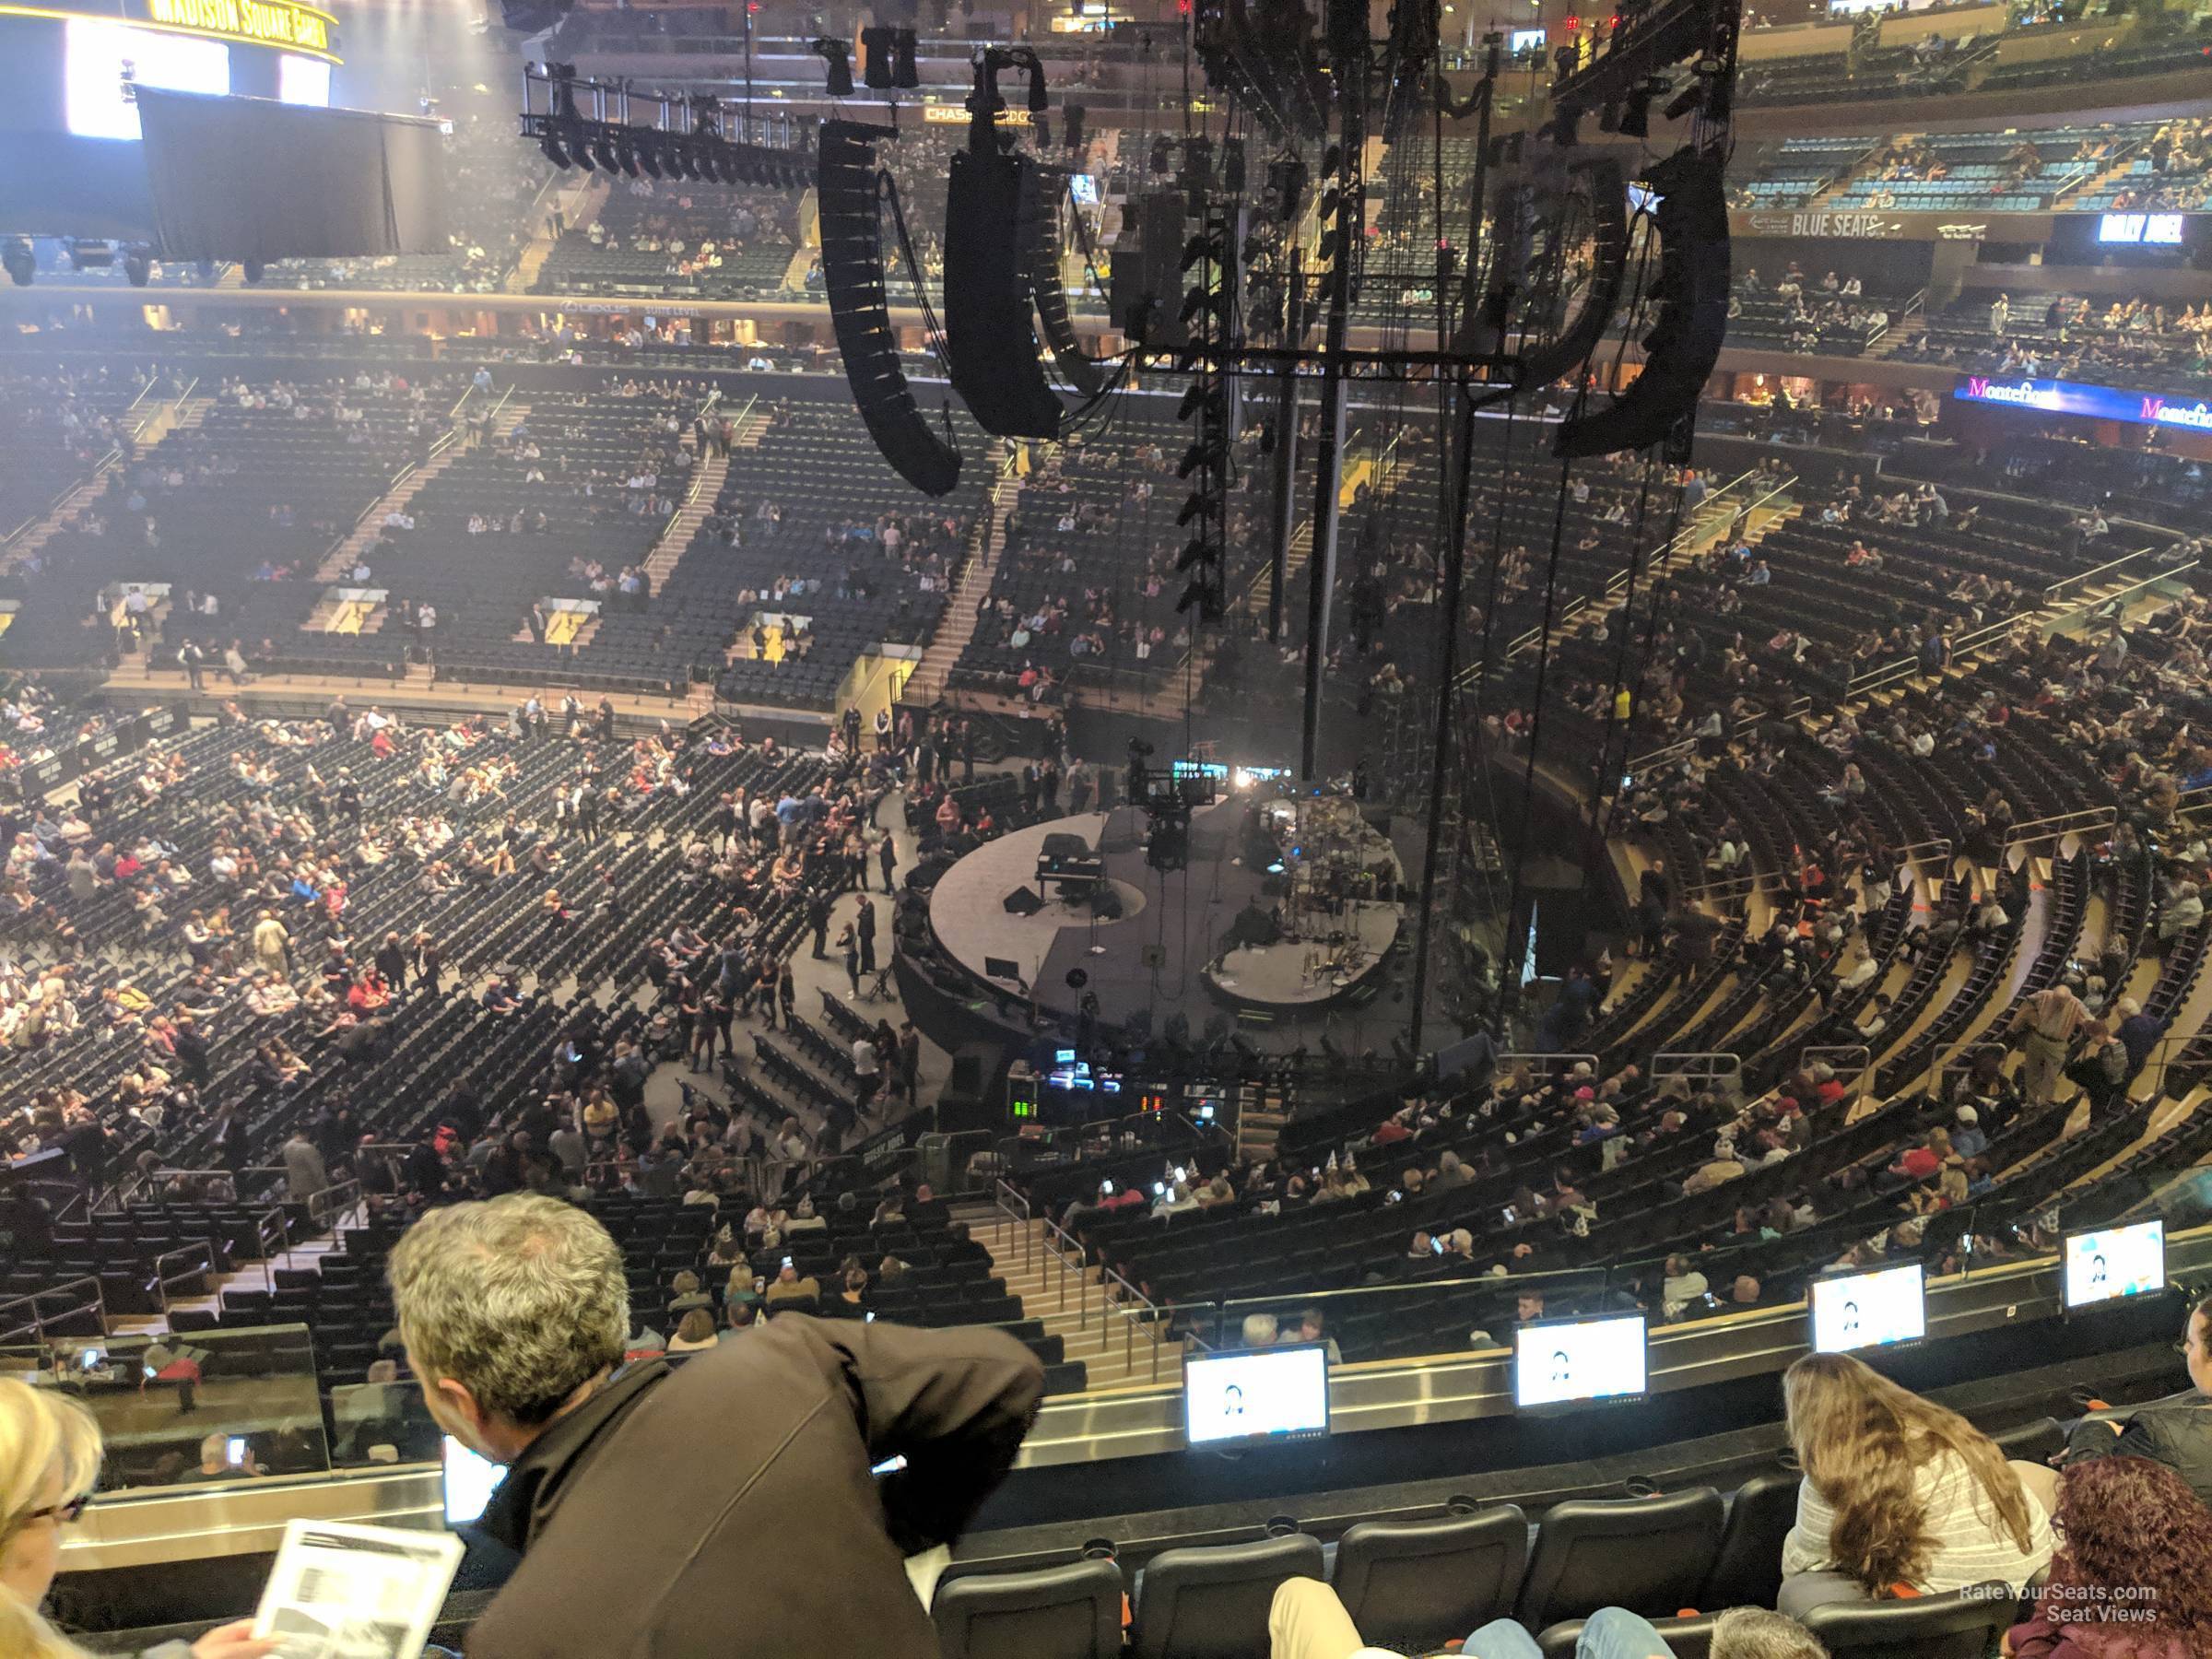 section 214, row 5 seat view  for concert - madison square garden